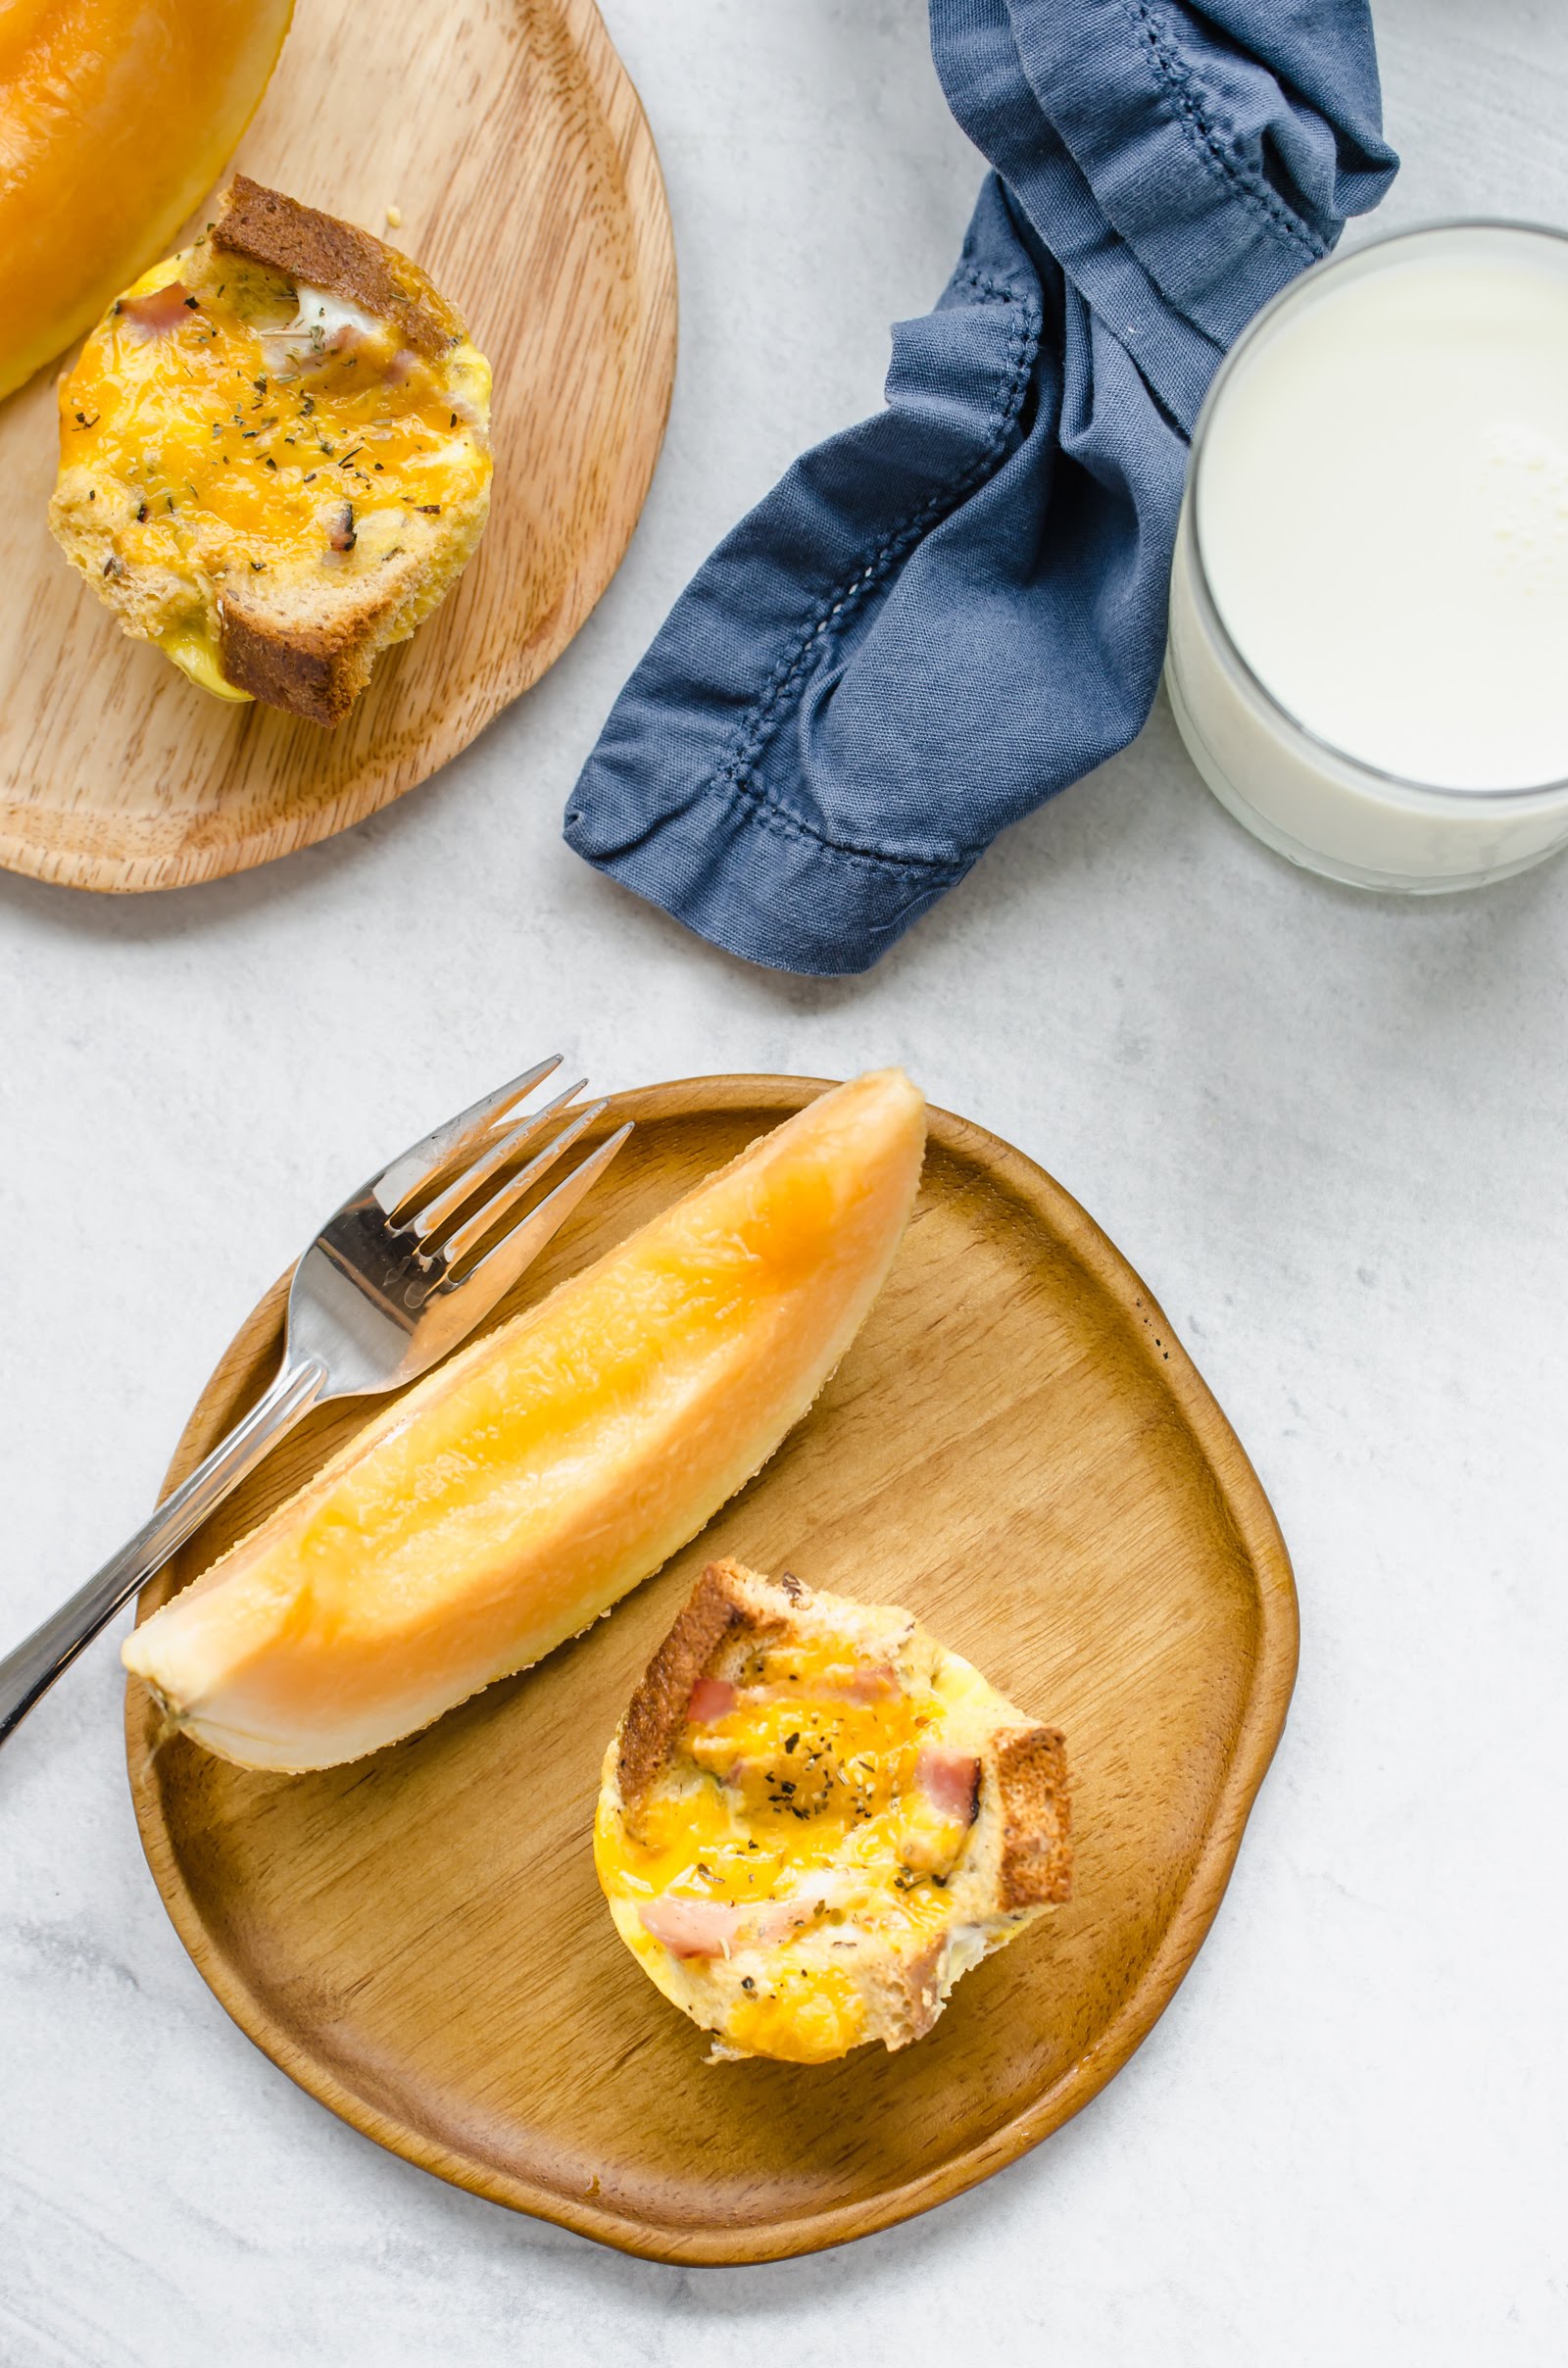 Breakfast casserole muffin on a wooden plate with a slice of cantaloupe and a fork.